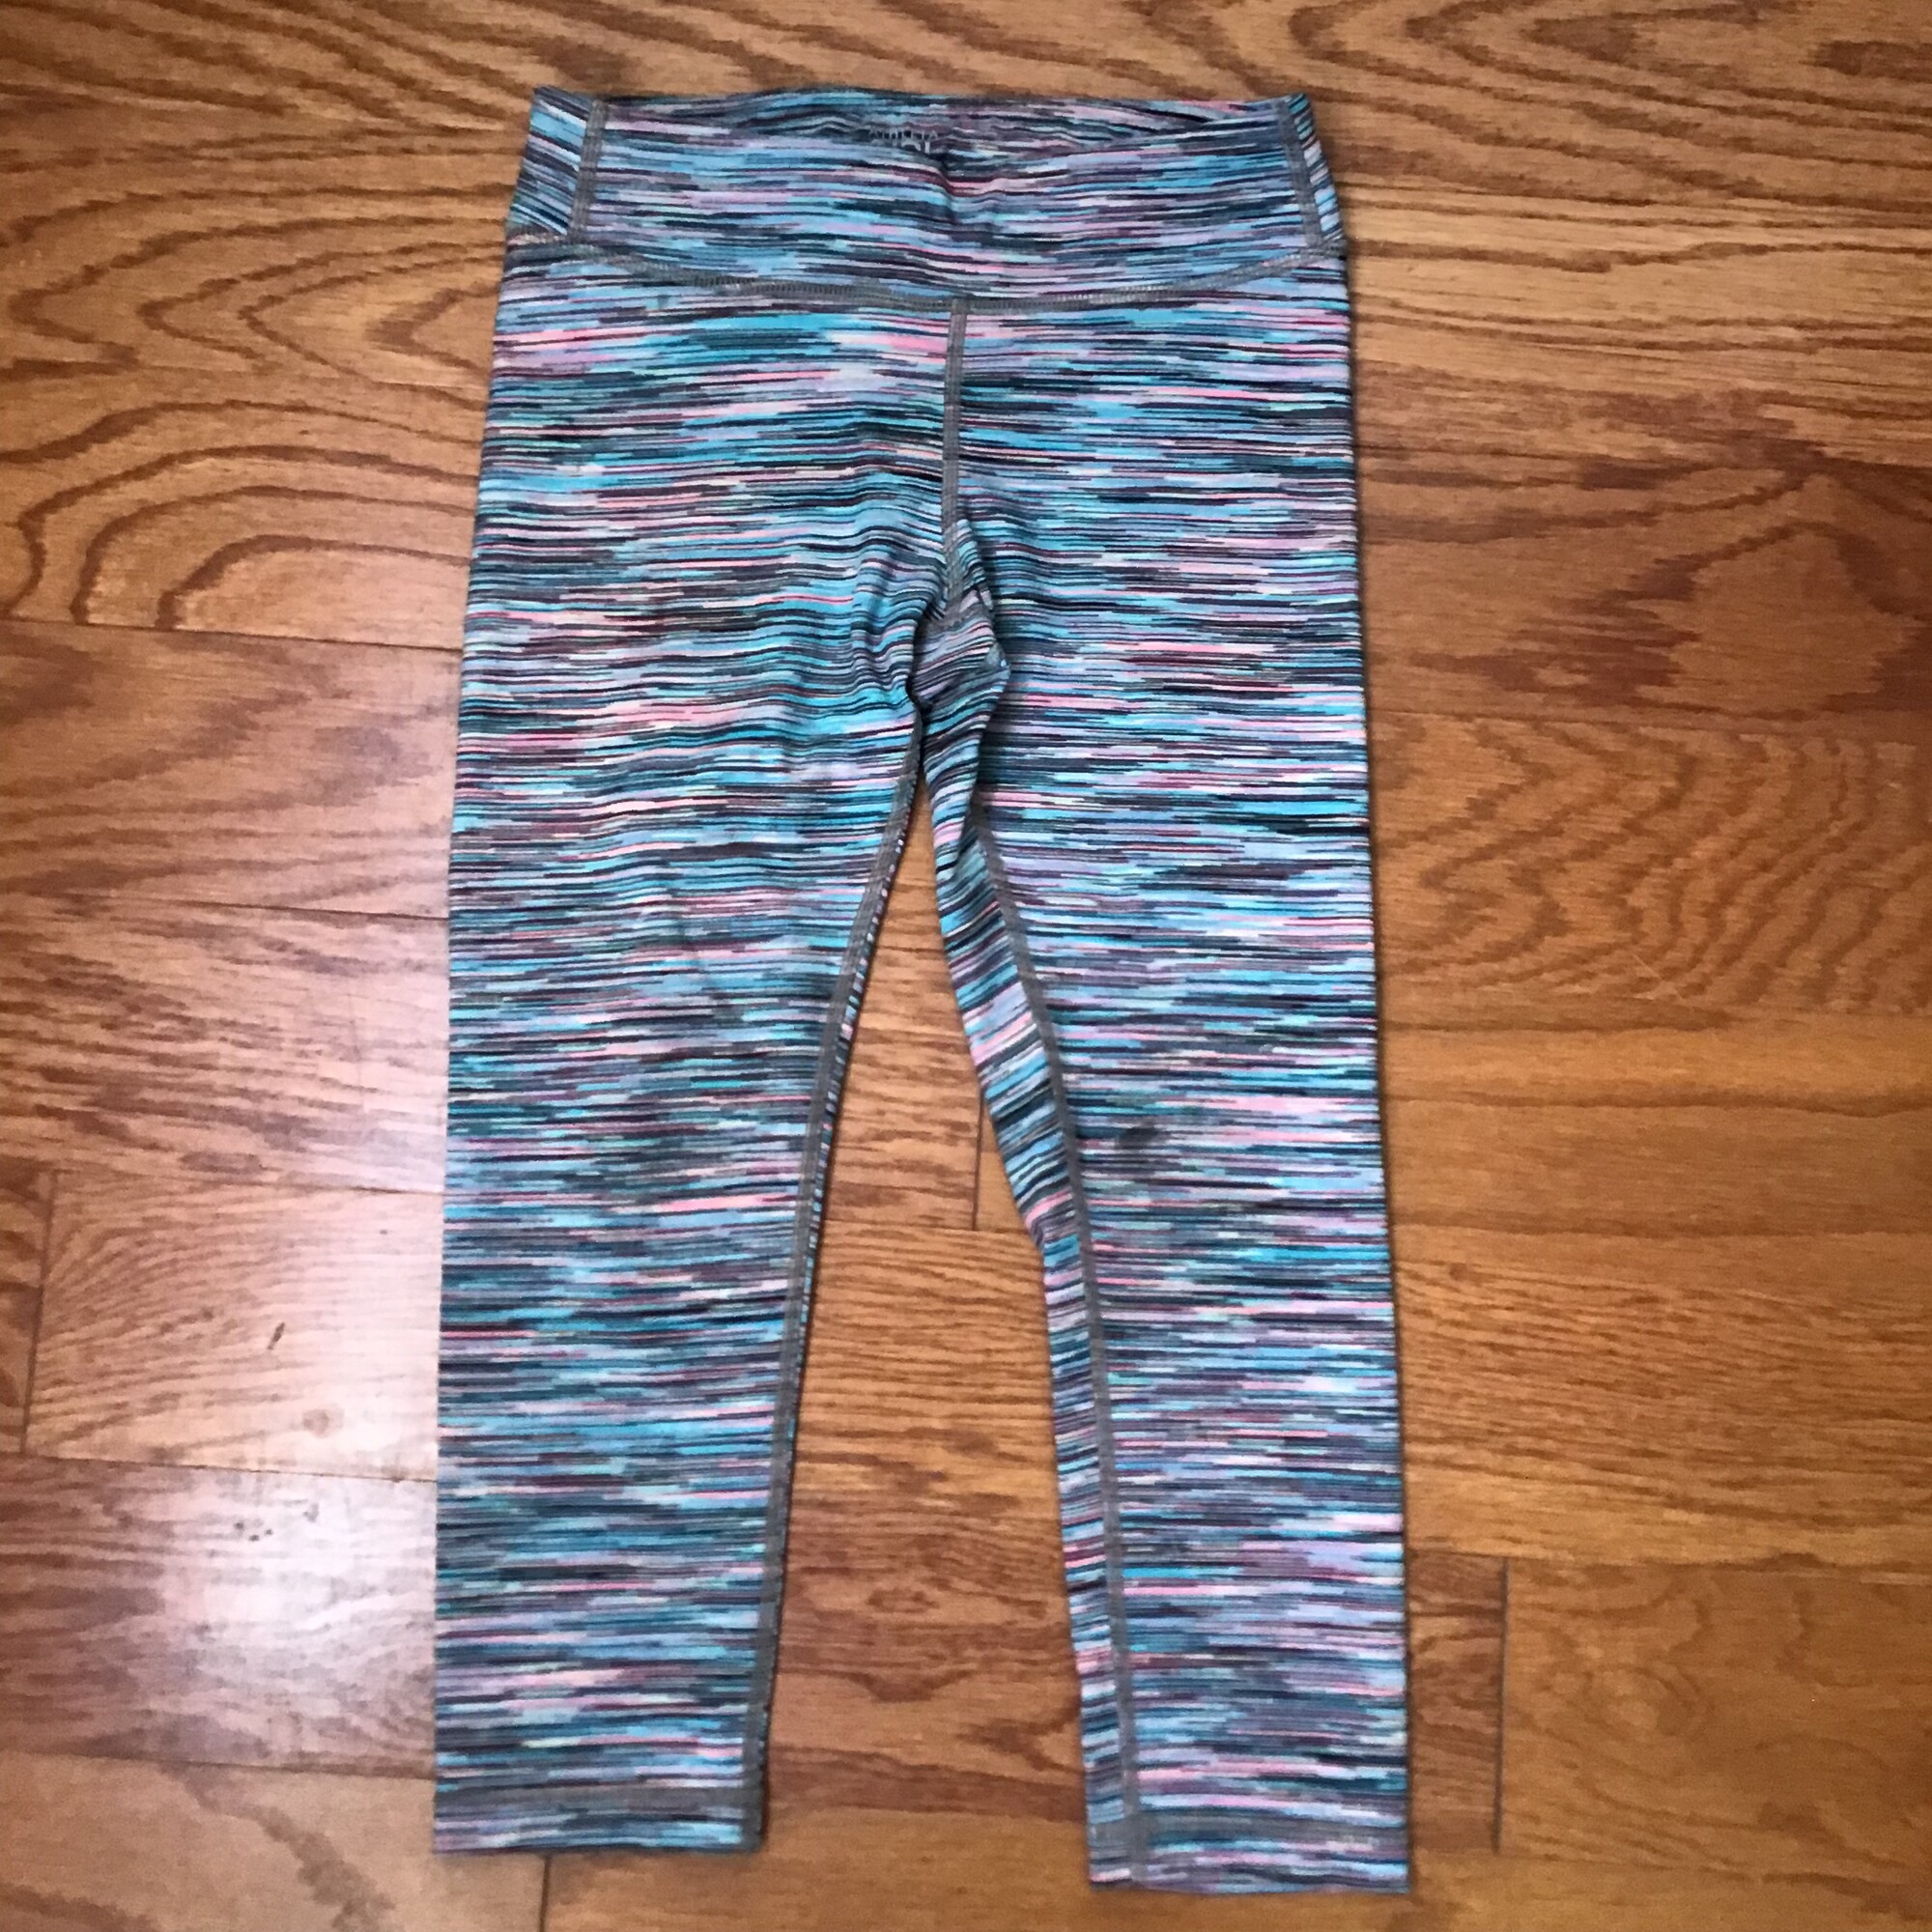 Athleta Girl Pant, Multi, Size: 7

ALL ONLINE SALES ARE FINAL.
NO RETURNS
REFUNDS
OR EXCHANGES

PLEASE ALLOW AT LEAST 1 WEEK FOR SHIPMENT. THANK YOU FOR SHOPPING SMALL!